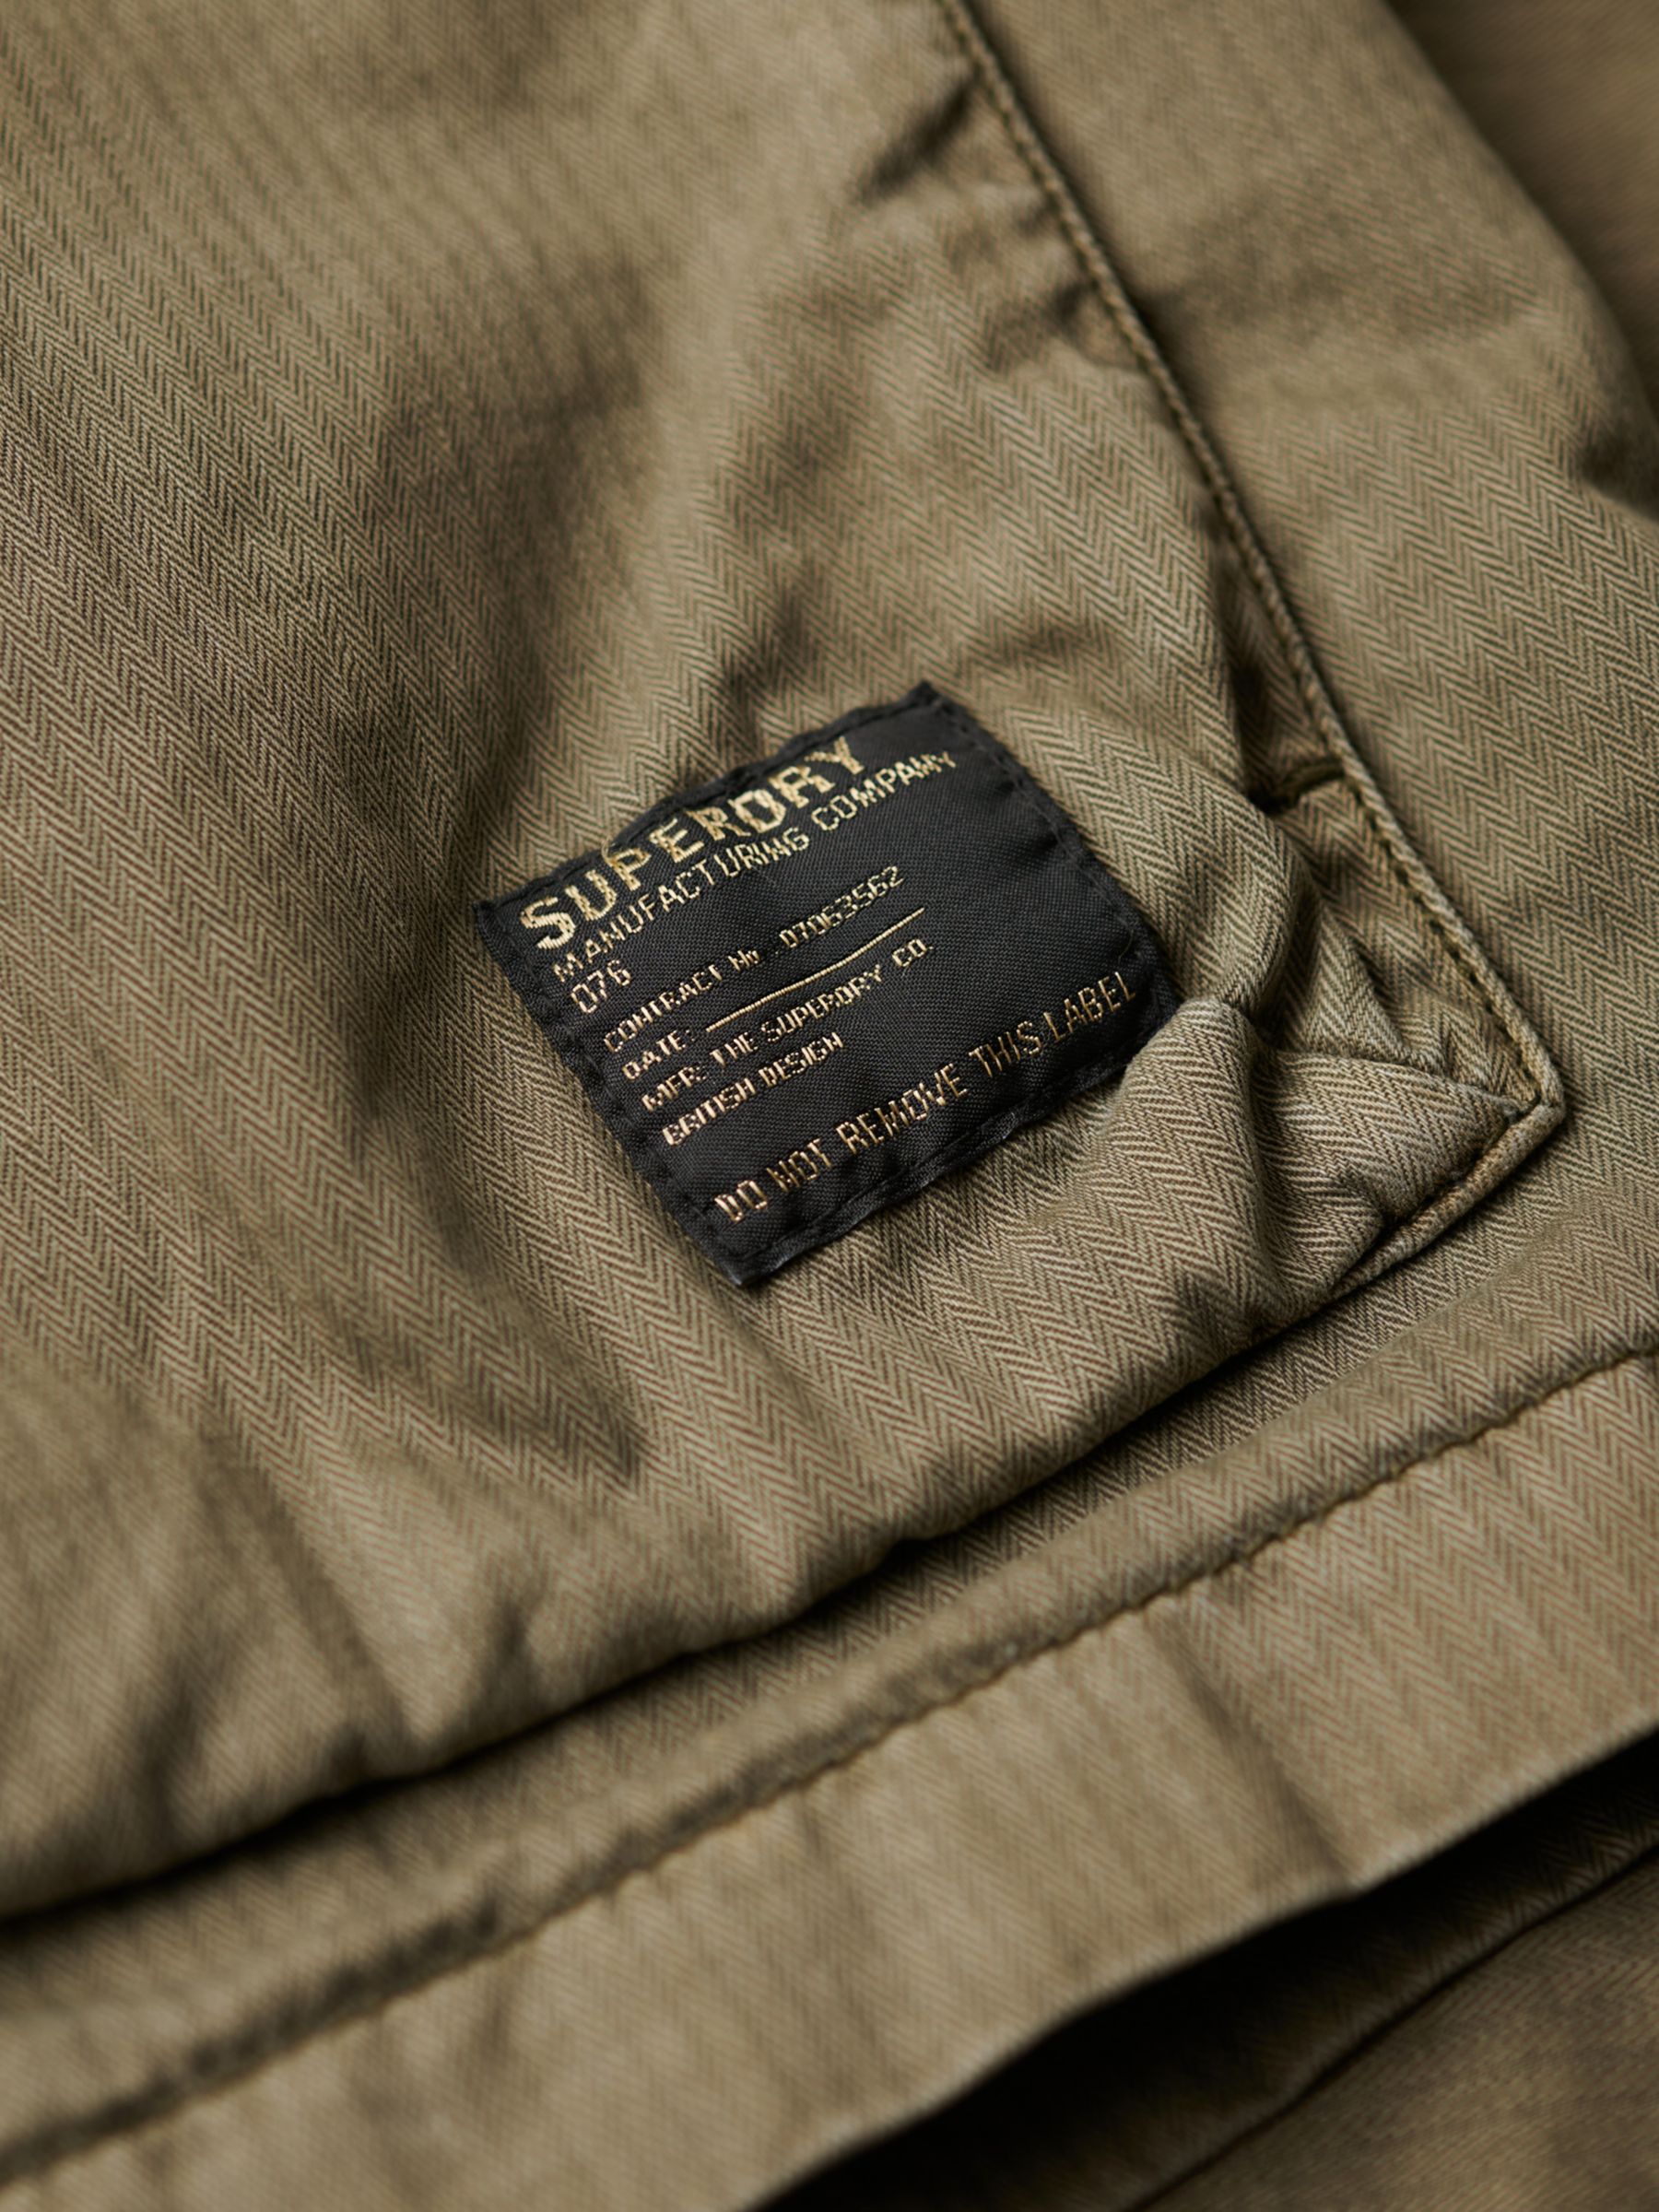 Buy Superdry Military M65 Lightweight Jacket, Dusty Olive Green Online at johnlewis.com